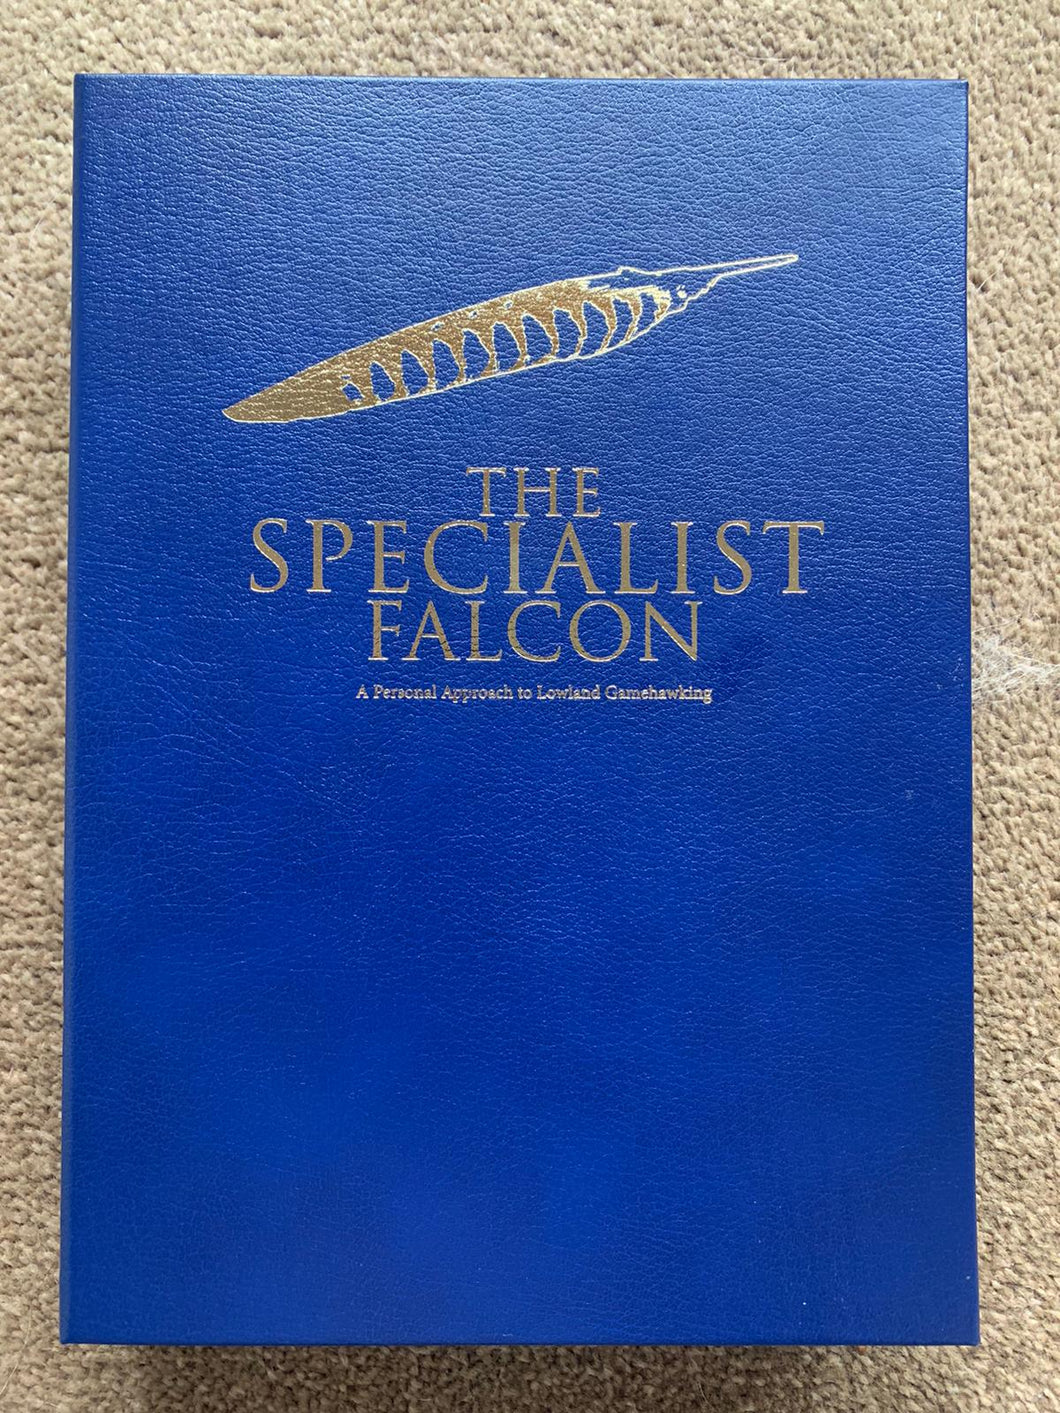 The Specialist Falcon; Special Limited Edition.